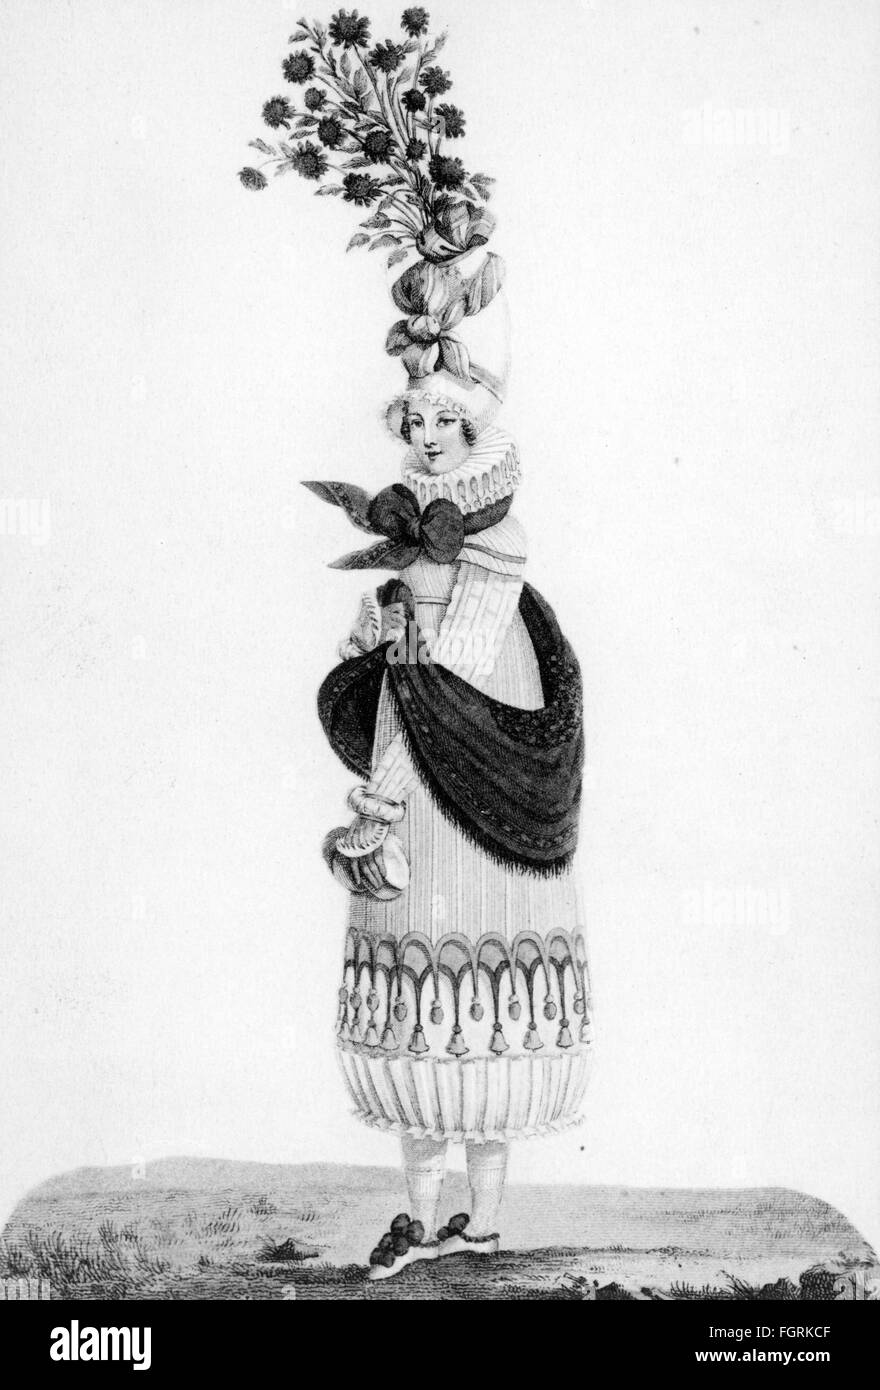 fashion, 19th century, woman in dress with ultralarge hat, engraving, early 19th century, 19th century, graphic, graphics, caricature, caricatures, humor, humour, satire, ladies' fashion, clothes, outfit, outfits, dress, dresses, accessory, accessories, headpiece, headpieces, hat, hats, ornament, ornaments, flowers, flower, extravagance, extravagances, extravagant, fashion for women, women's clothing, historic, historical, woman, women, female, people, Additional-Rights-Clearences-Not Available Stock Photo